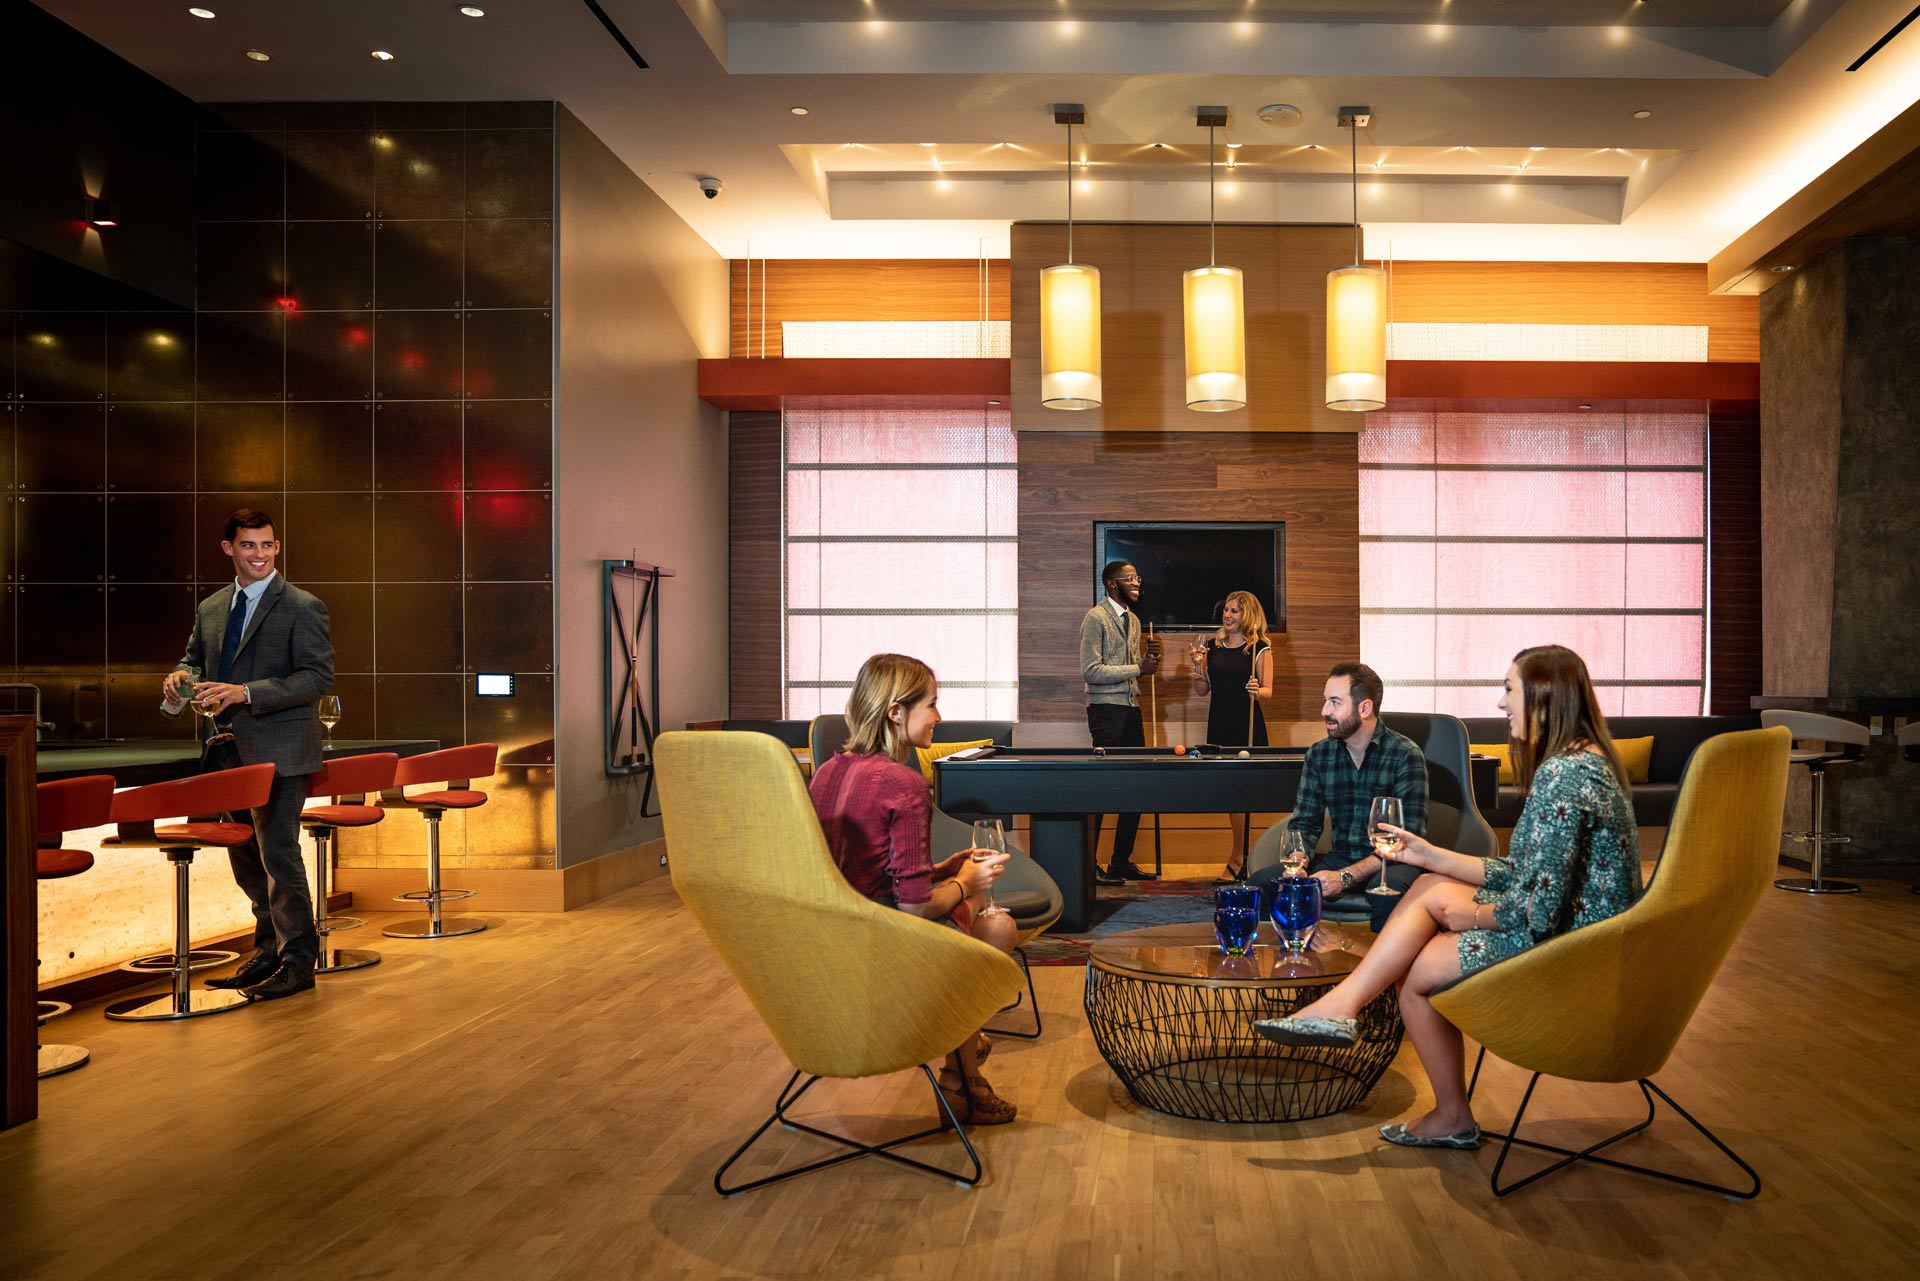 Our clubroom is the perfect spot to relax with friends.